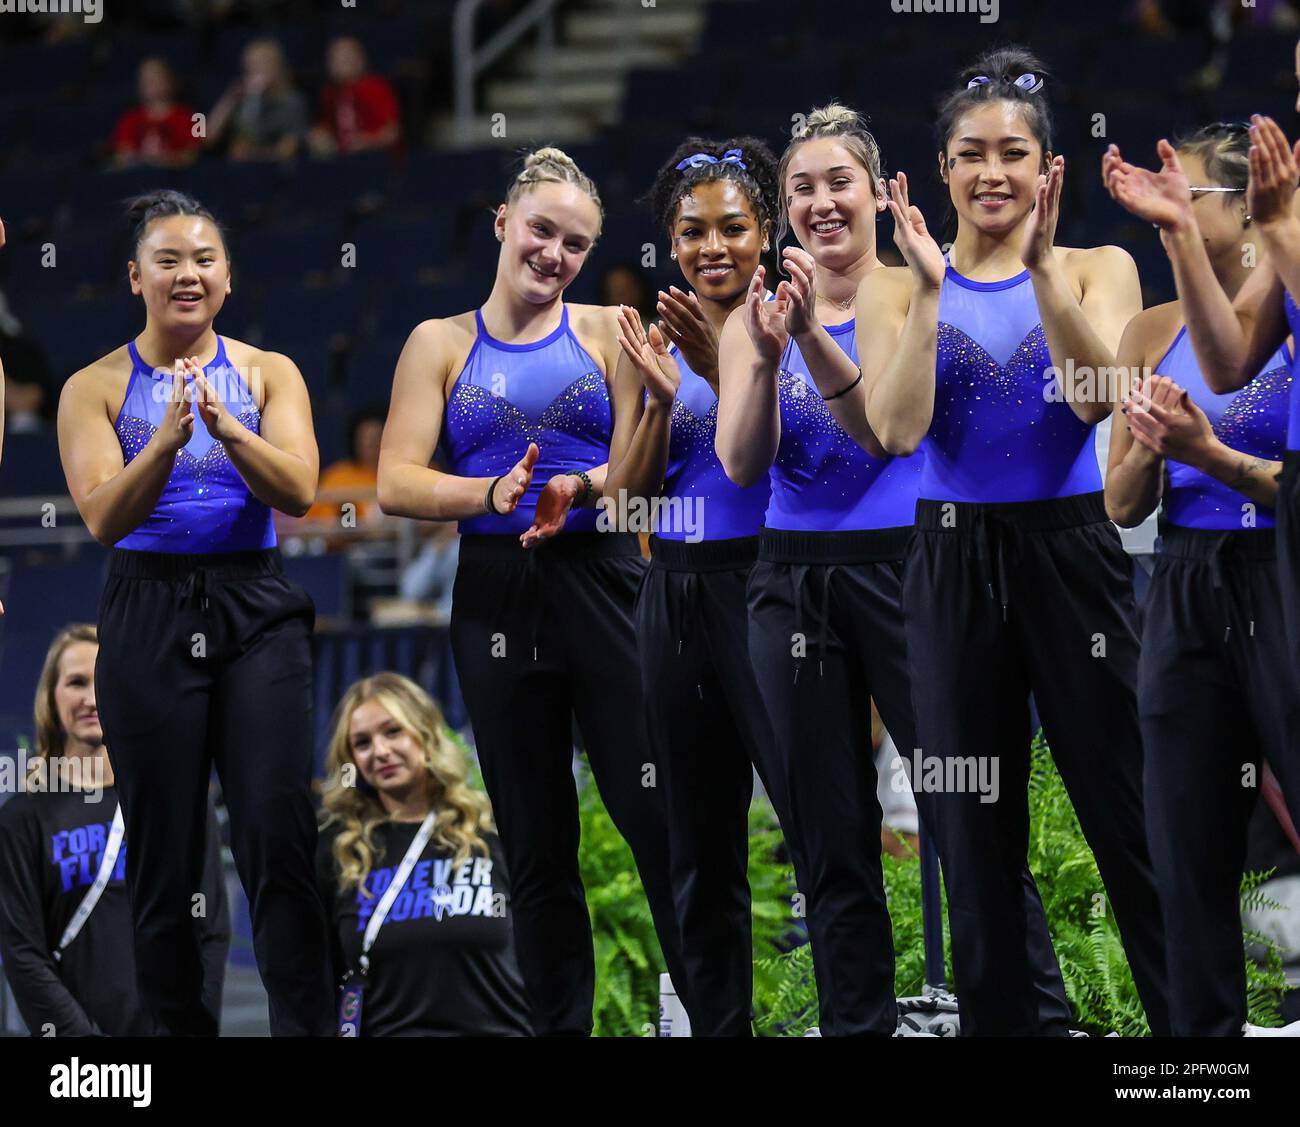 March 18, 2023 The Florida gymnastics team during warmups of the 2023